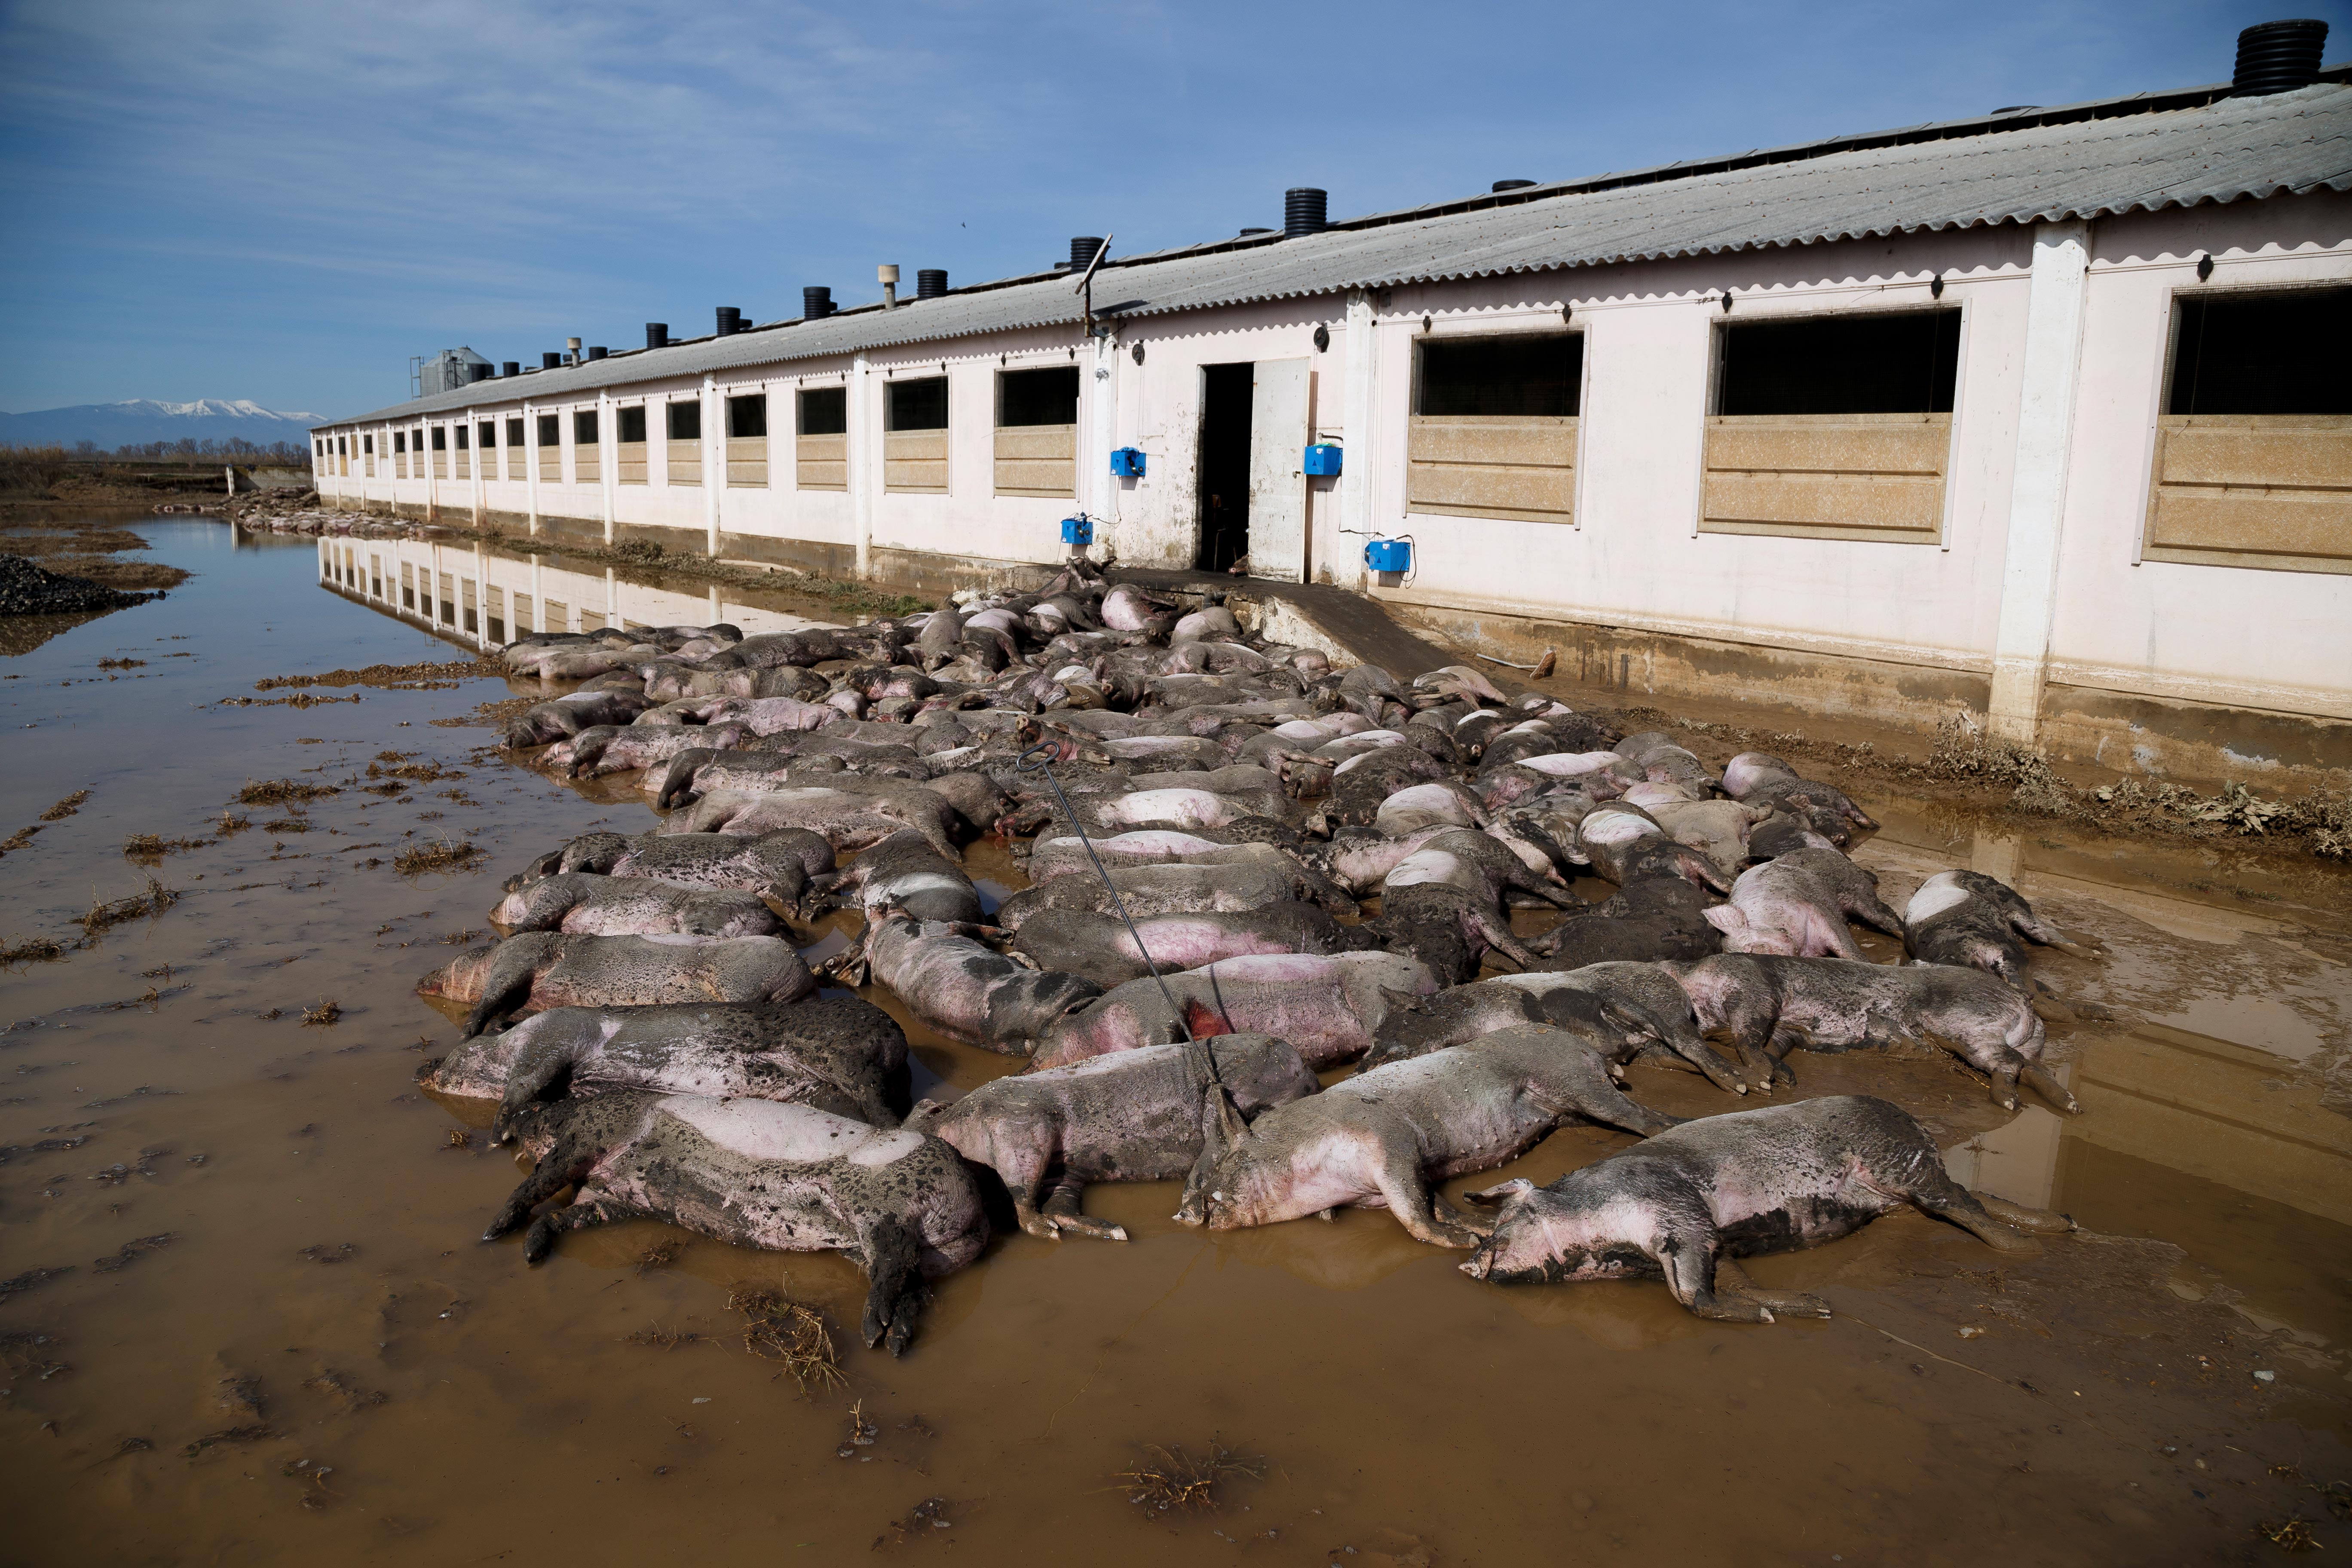 Carcasses of pigs stacked on the outskirts of a farm after being removed from the inside of the farm because of the floods suffered by the overflood of the river Ebro. 